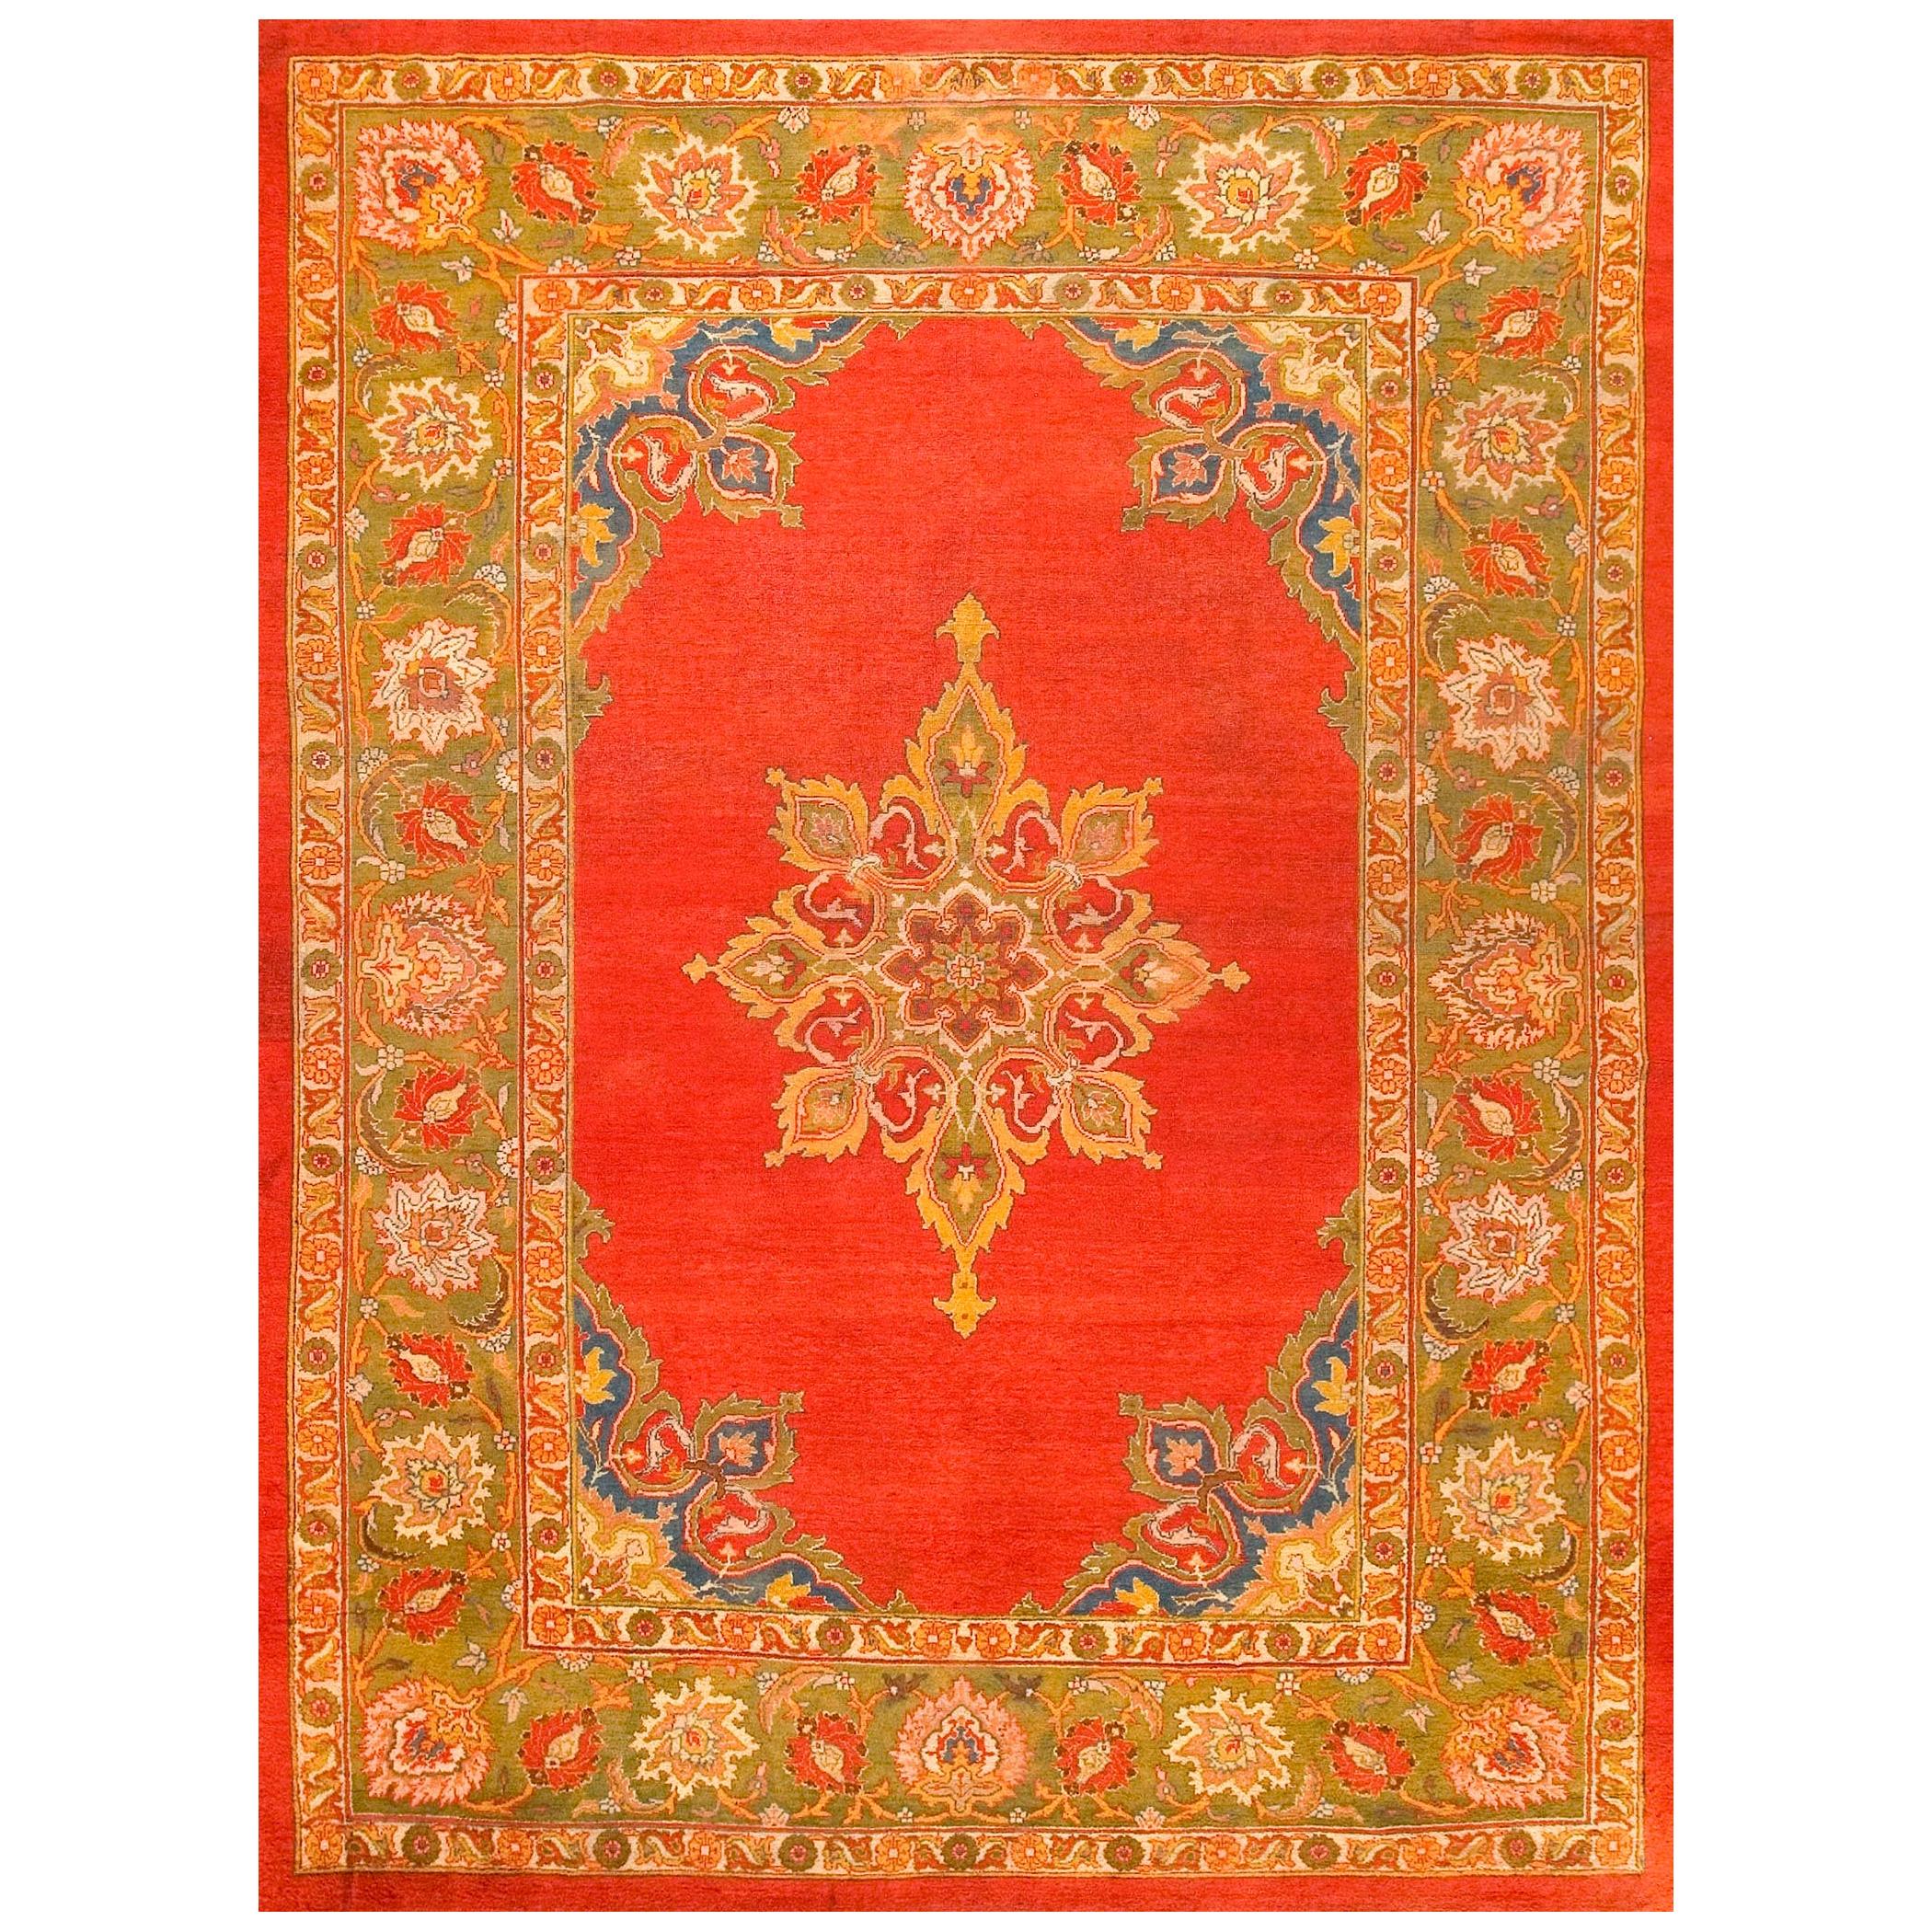 Early 20th Century N. Indian Amritsar Carpet ( 9' x 12' - 275 x 365 ) For Sale